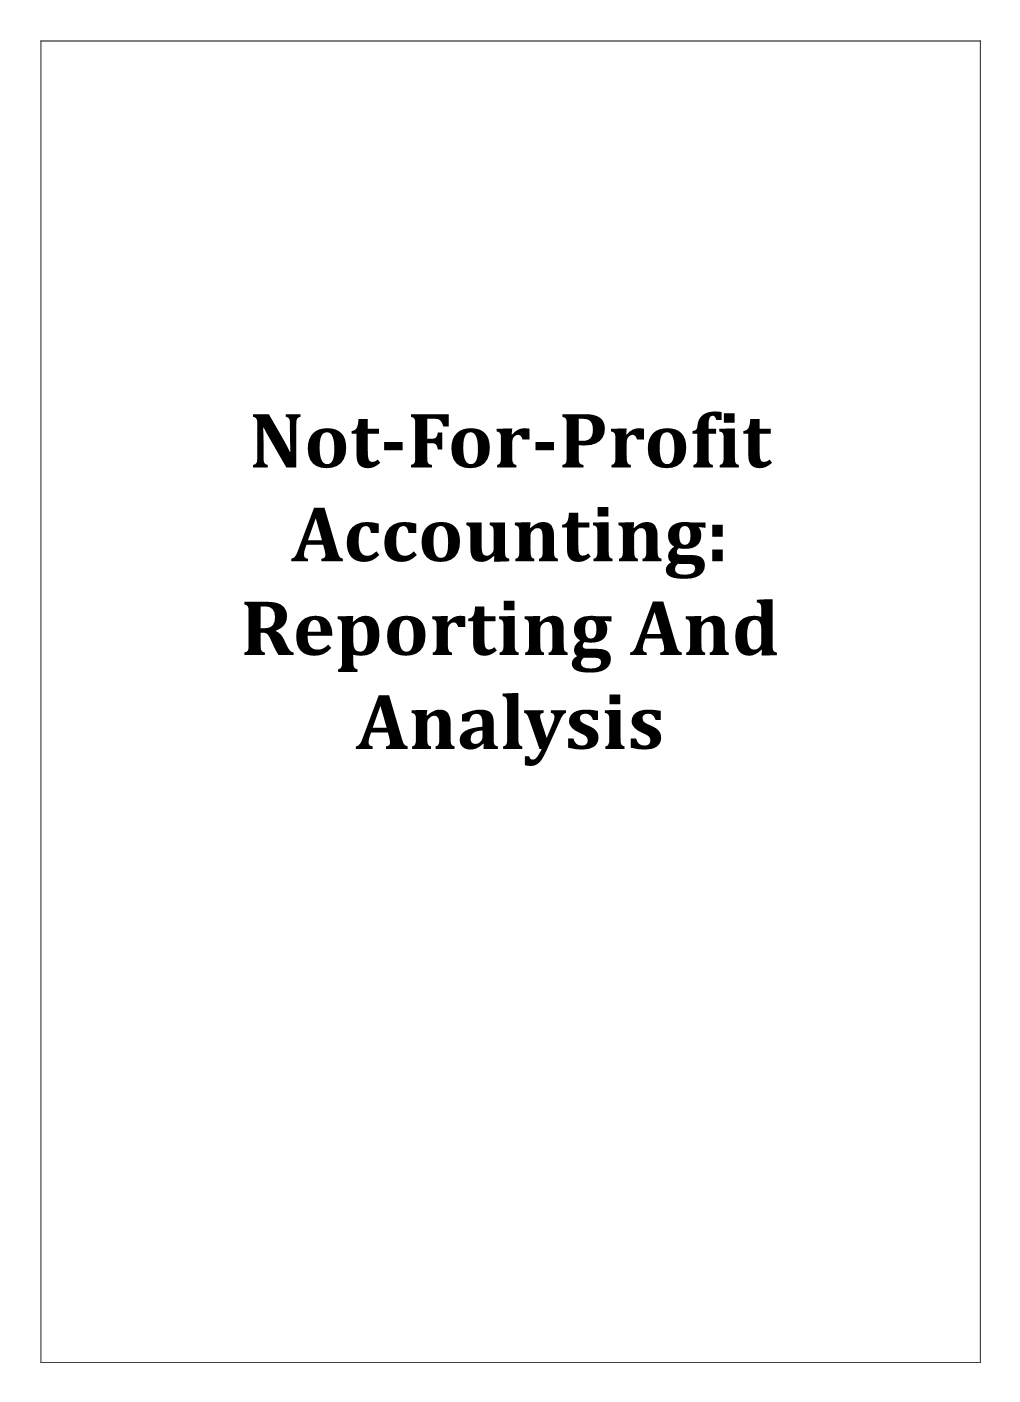 Not-For-Profit Accounting: Reporting and Analysis